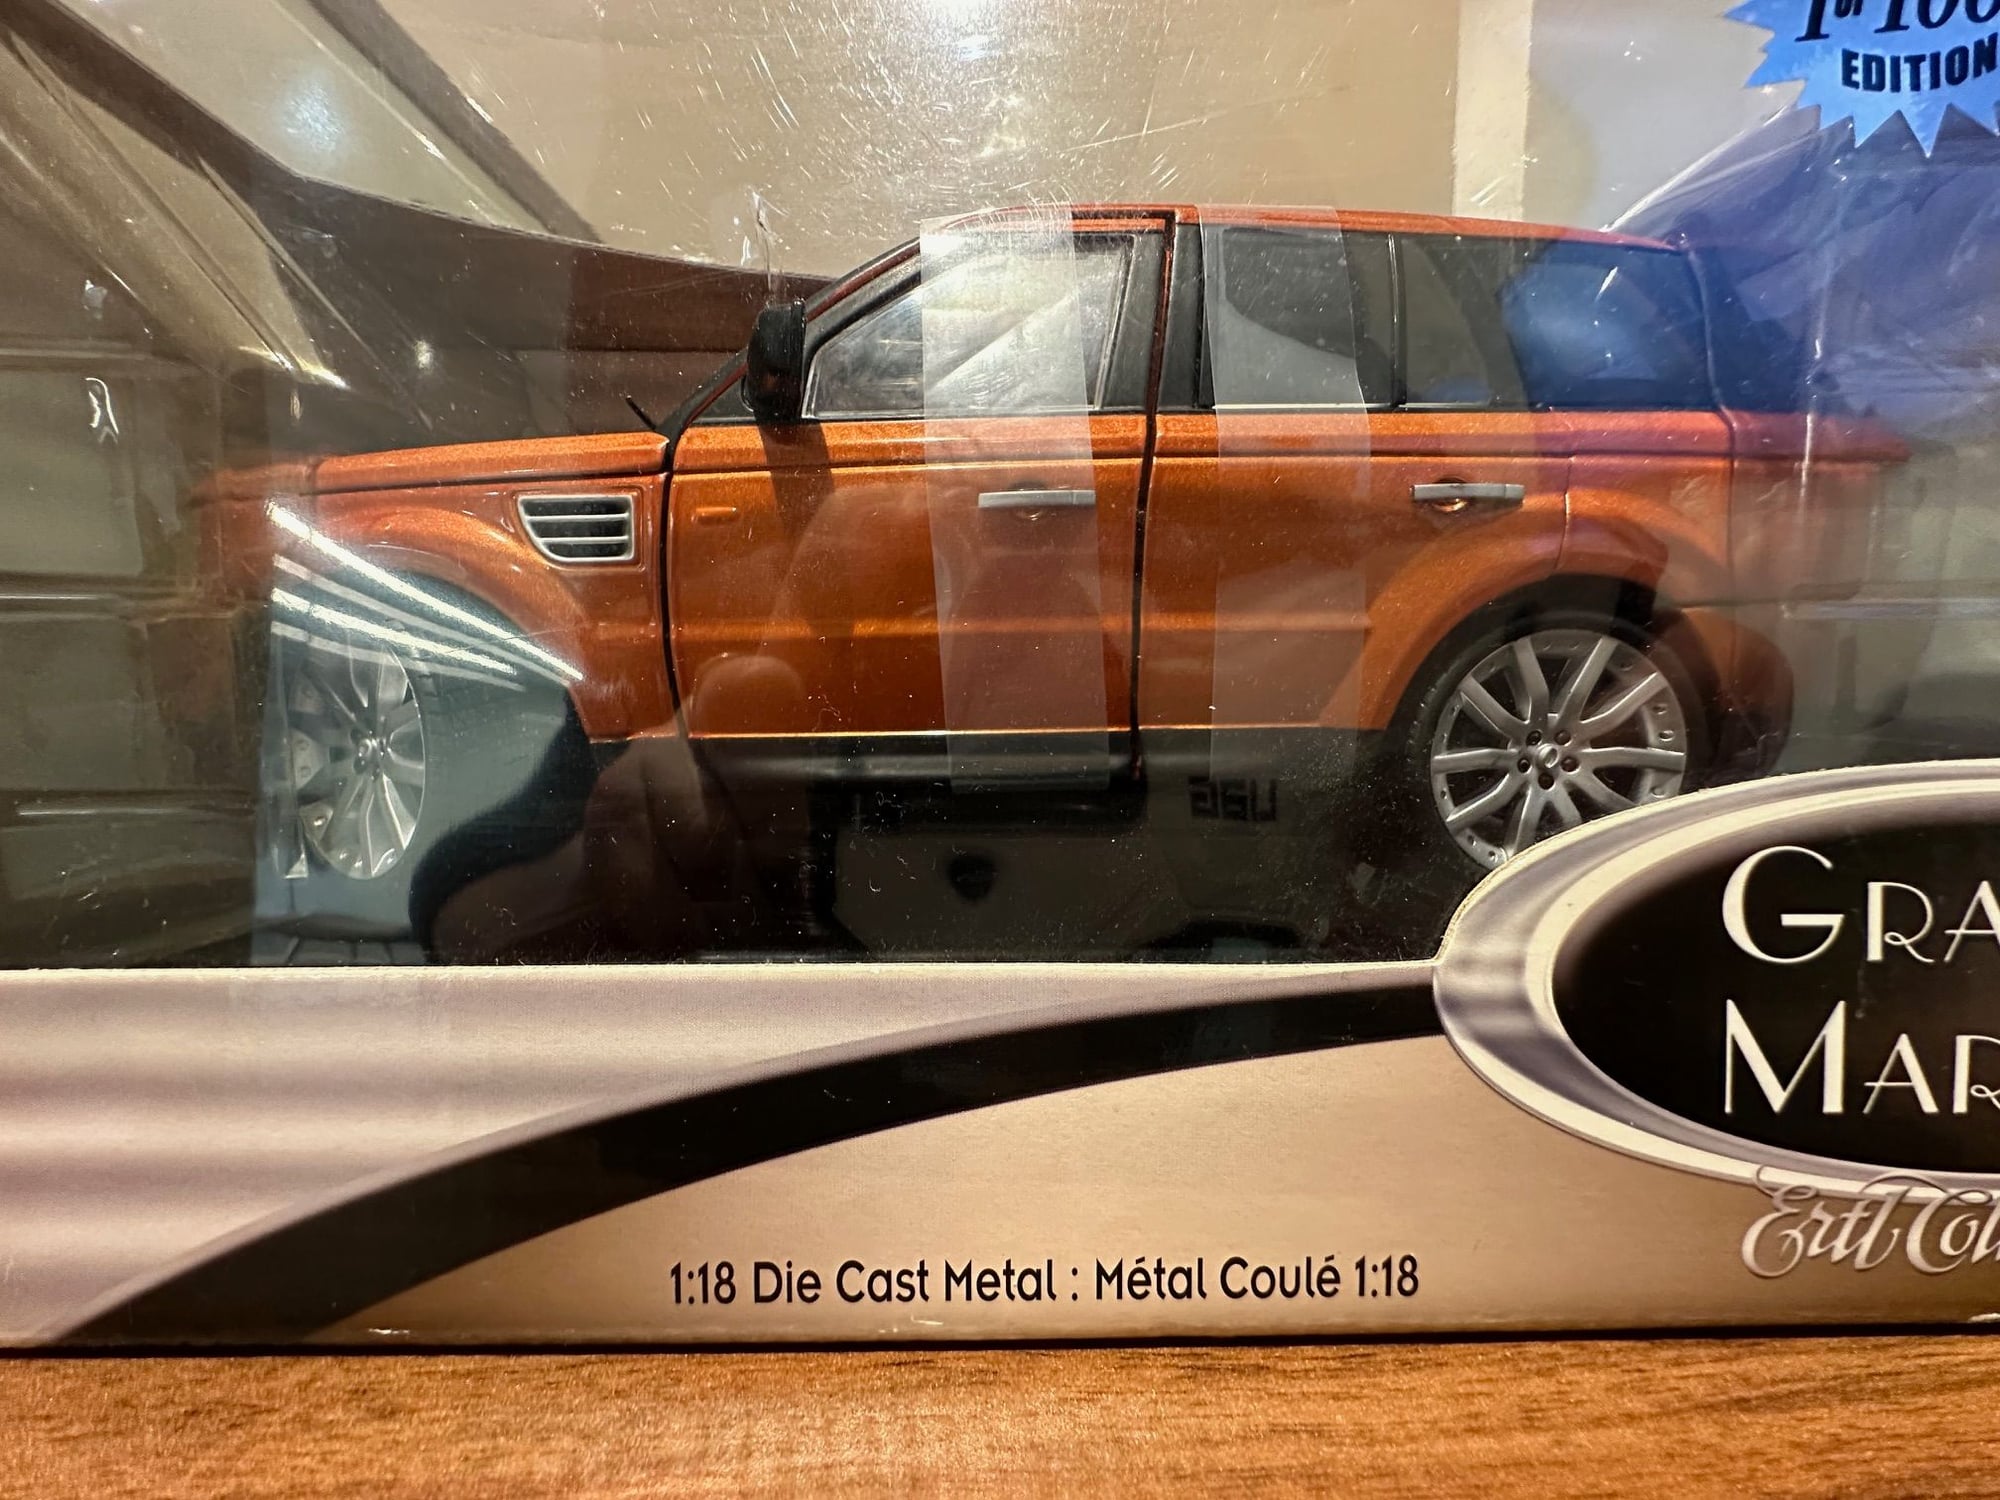 Miscellaneous - Ertl grandes marques range rover sport lr01516or brand new never opened nos 150.00 - New - All Years  All Models - Tysons Corner, VA 22182, United States